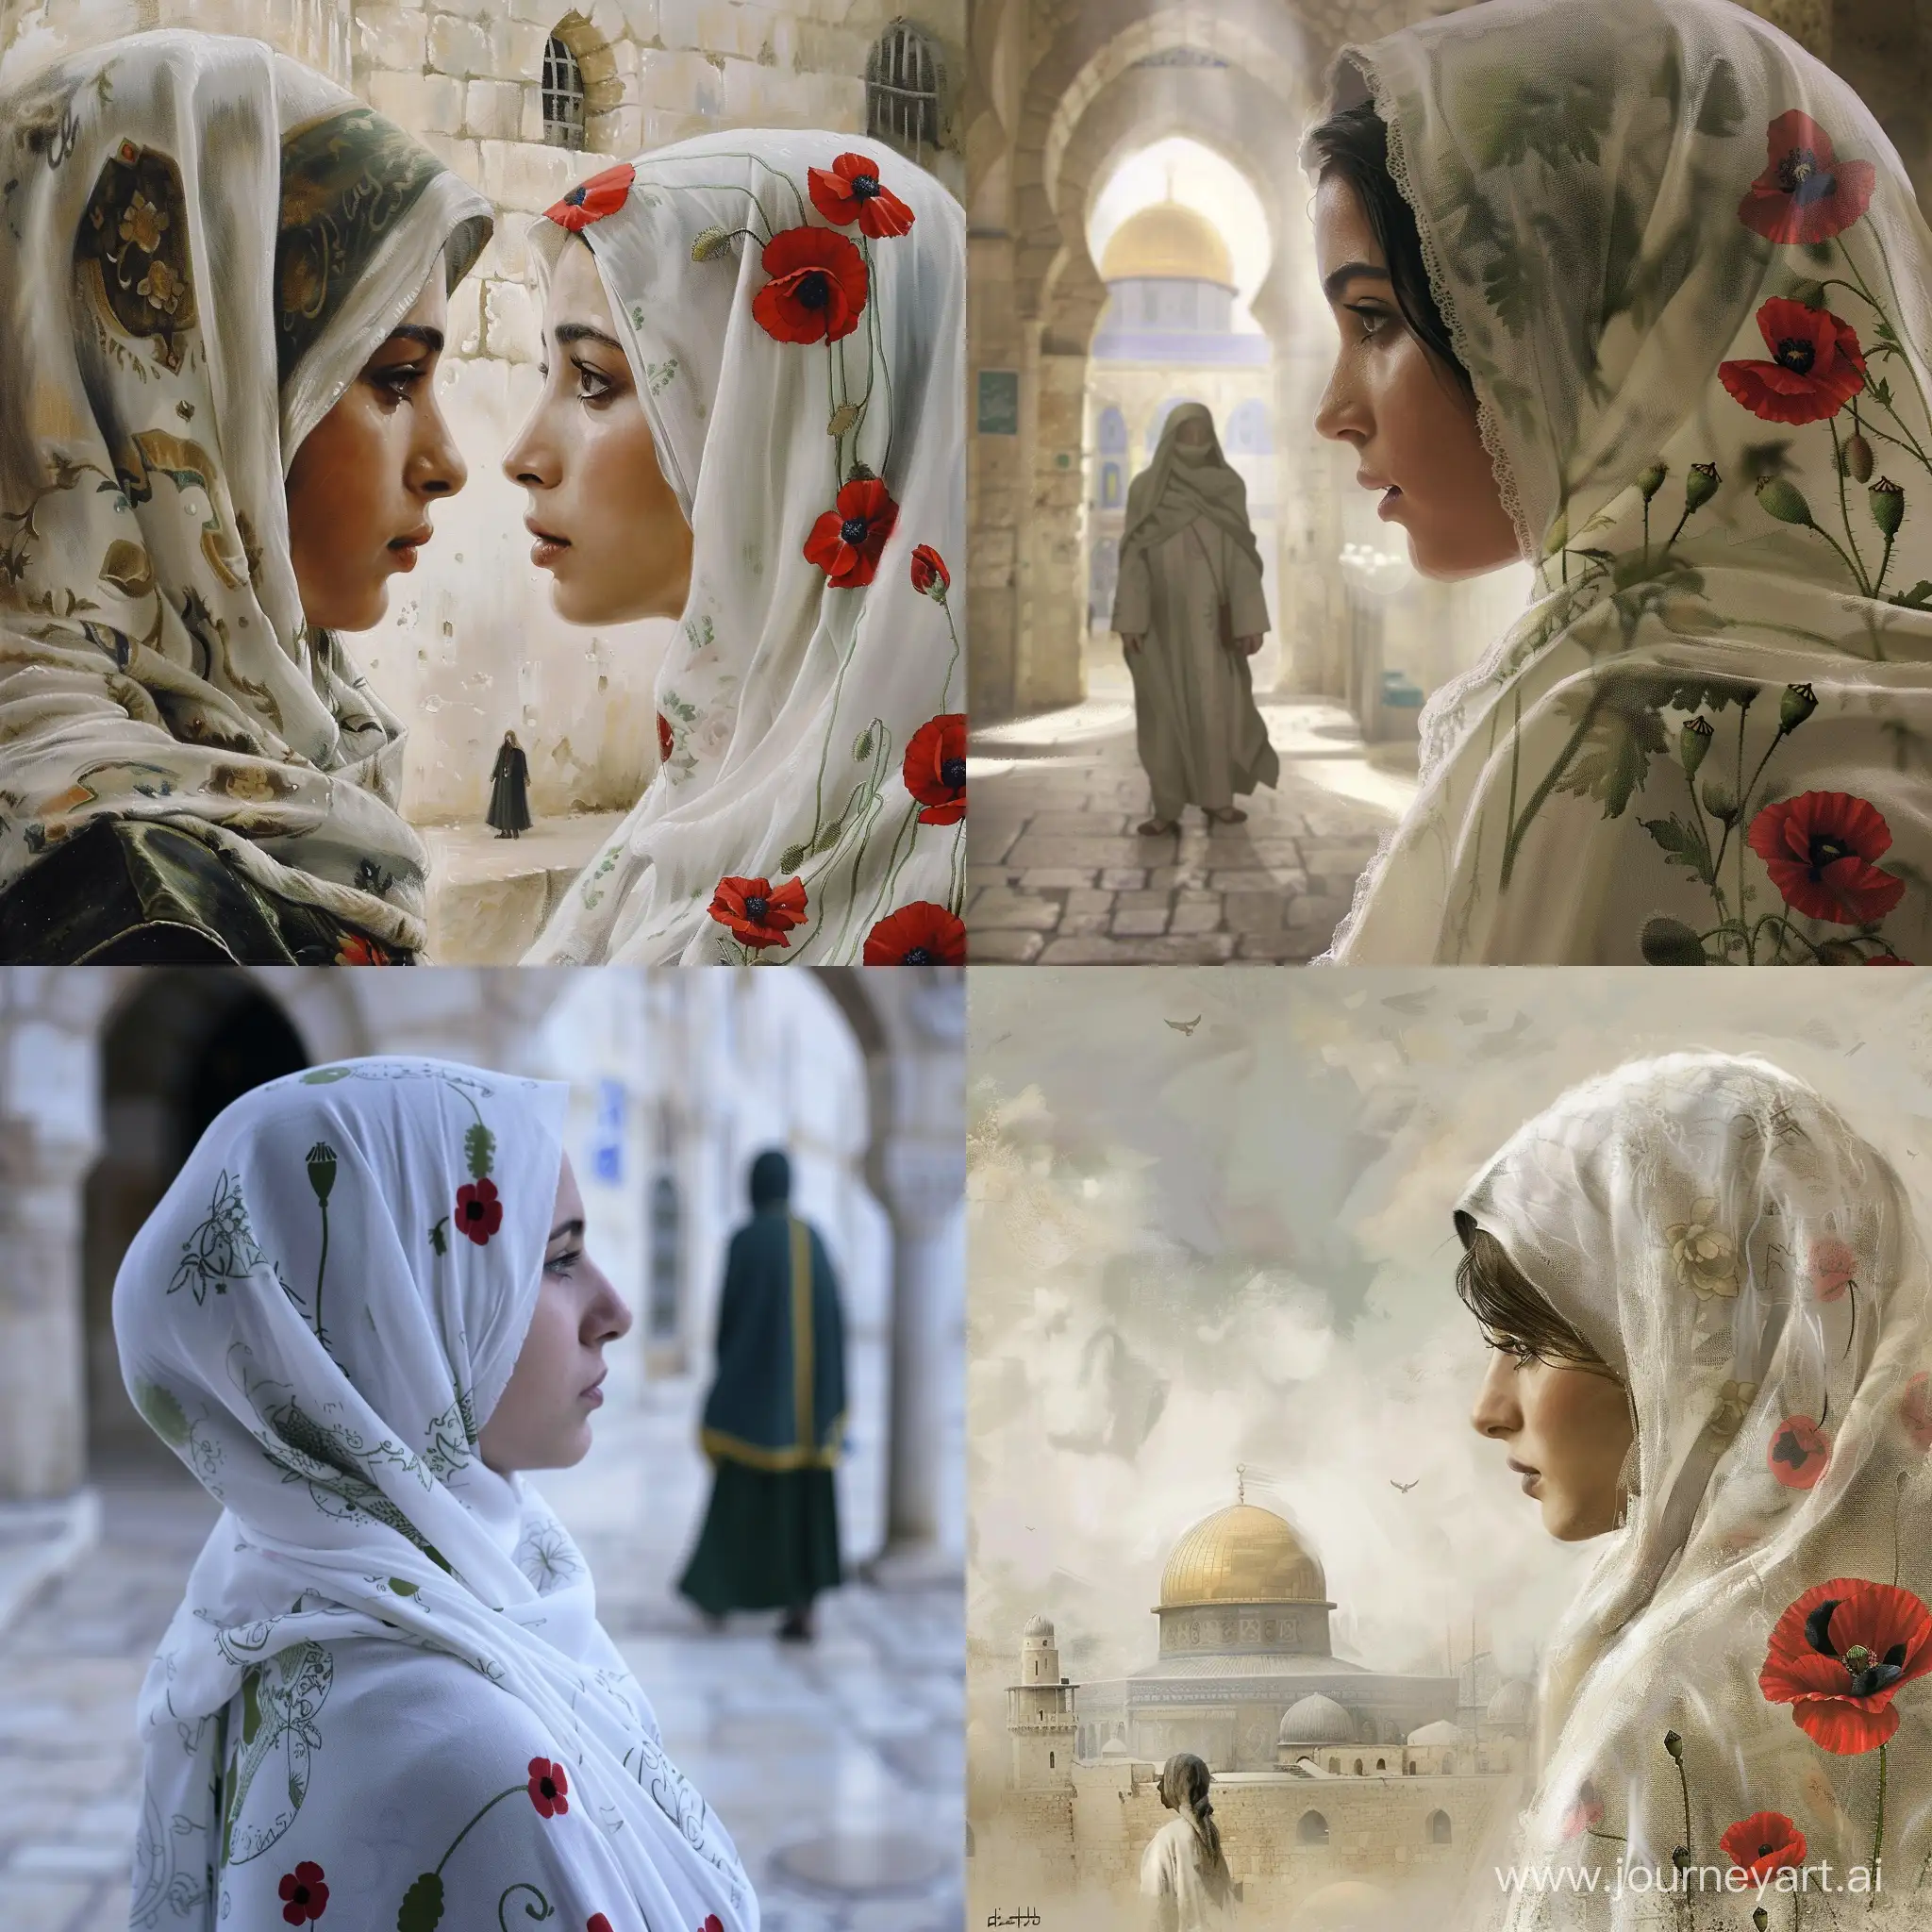 A young innocent muslim woman, wearing a white headscarf with poppy flowers, looks at the last savior standing in Al-Aqsa Mosque.